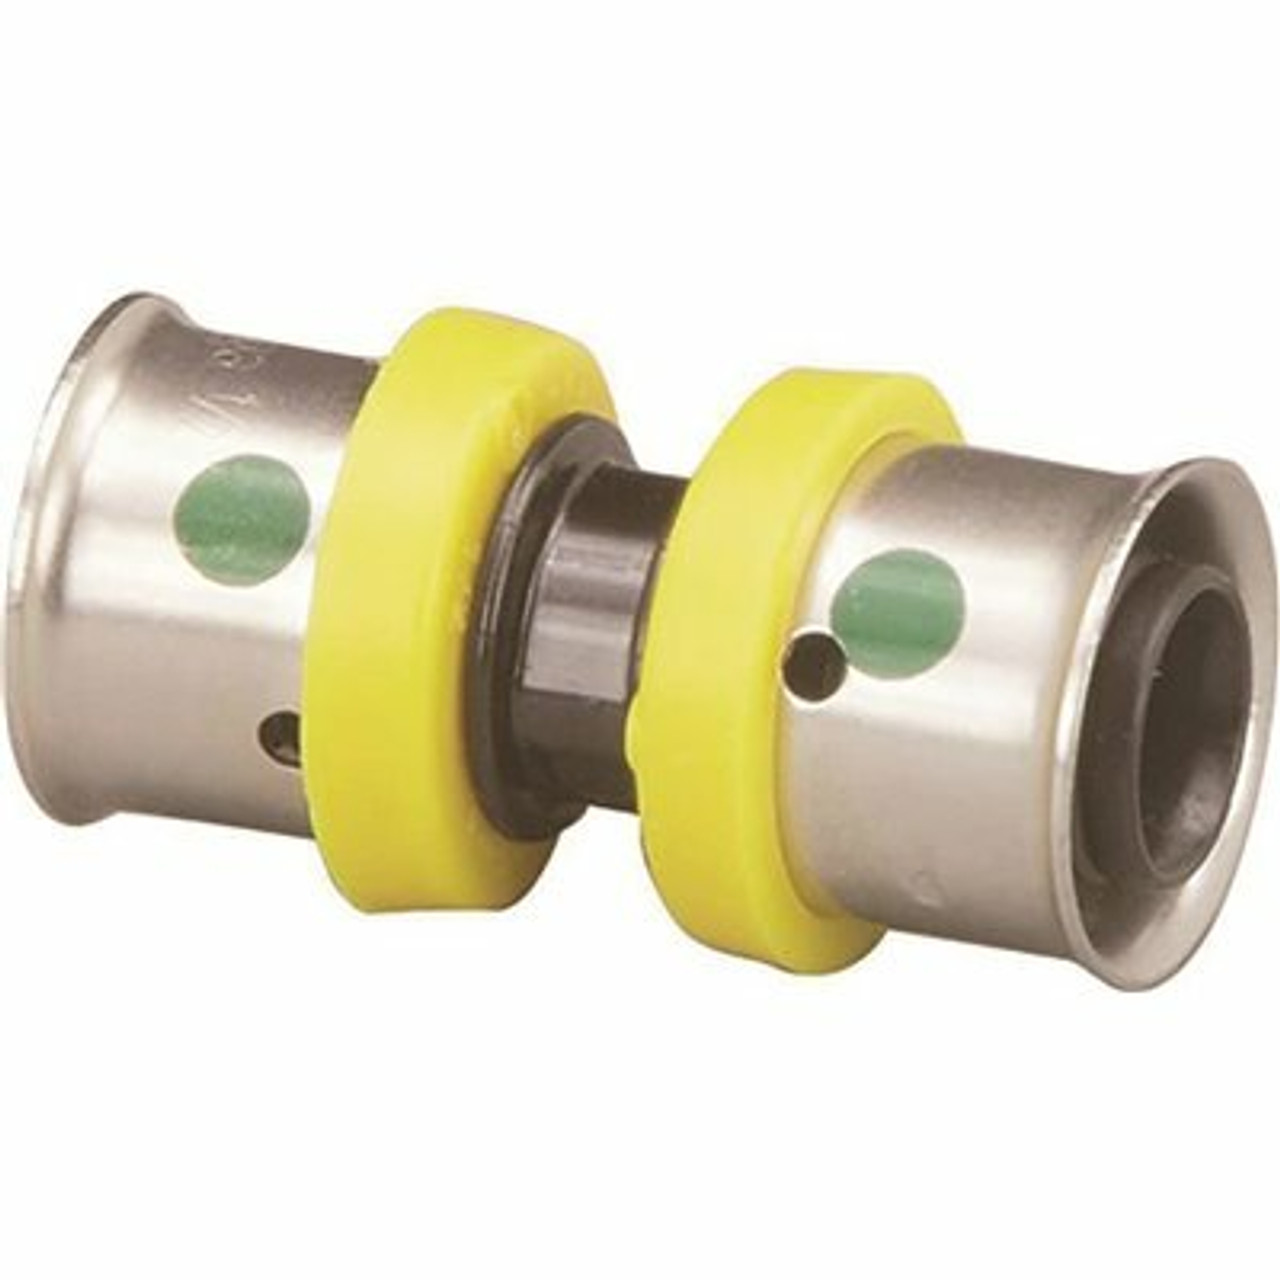 Viega Pureflow 3/4 In. X 1/2 In. Polymer Press Coupling (25-Pack)